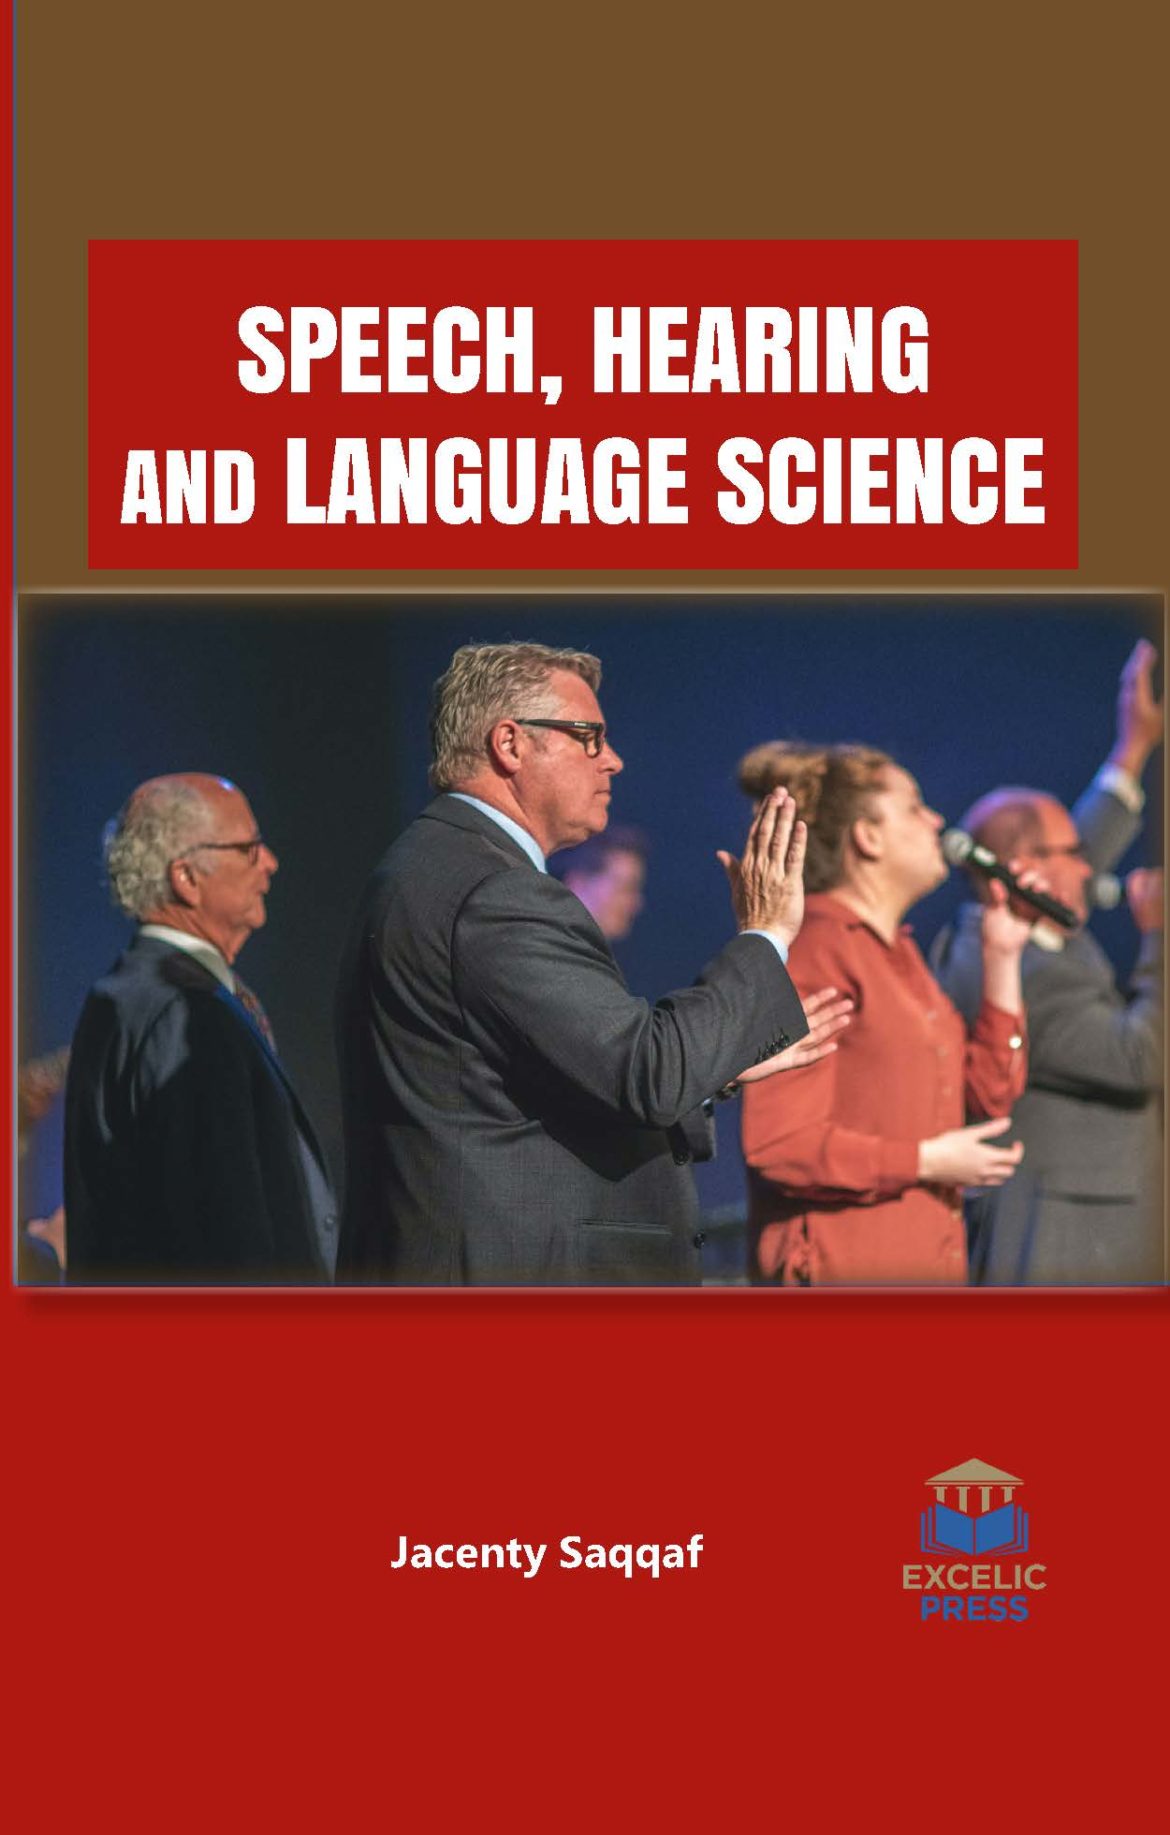 Speech, Hearing and Language Sciences Excelic Press